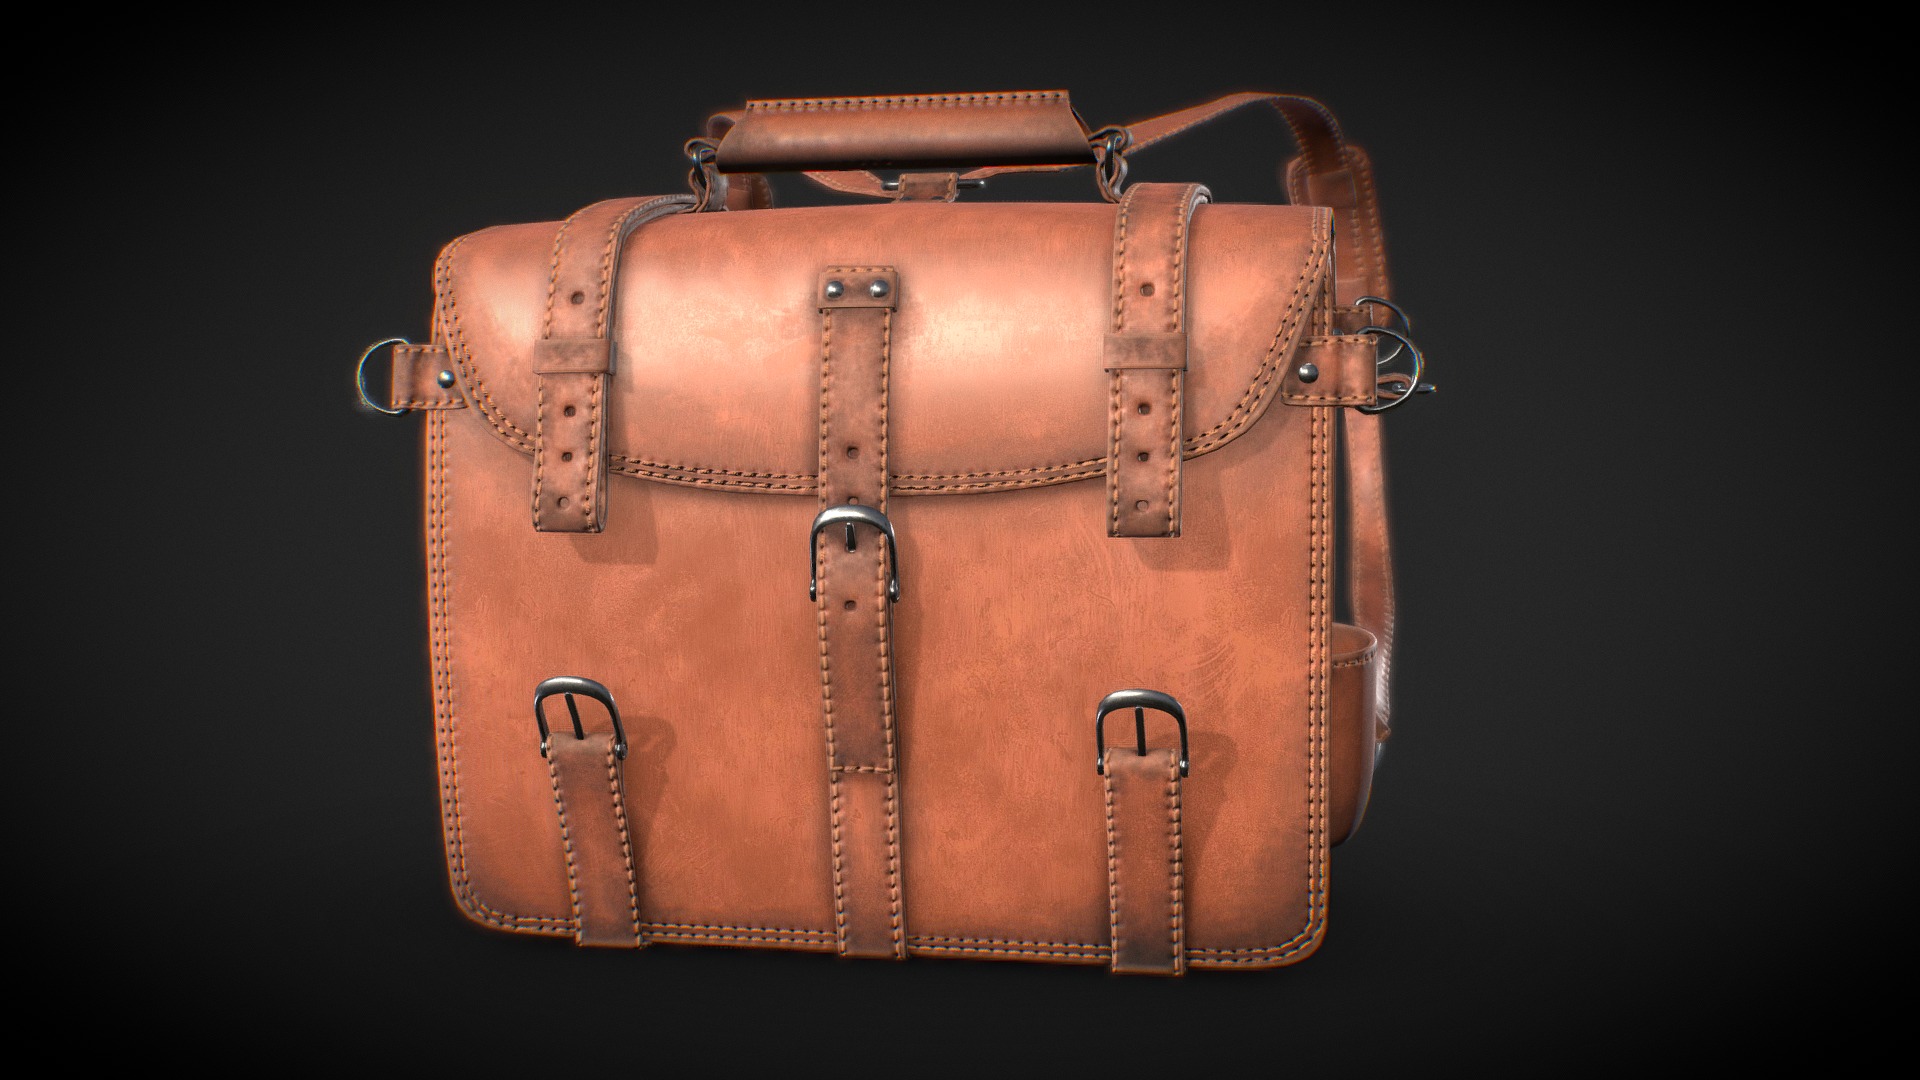 3D model Leather Back Pack Final - This is a 3D model of the Leather Back Pack Final. The 3D model is about a brown leather purse.